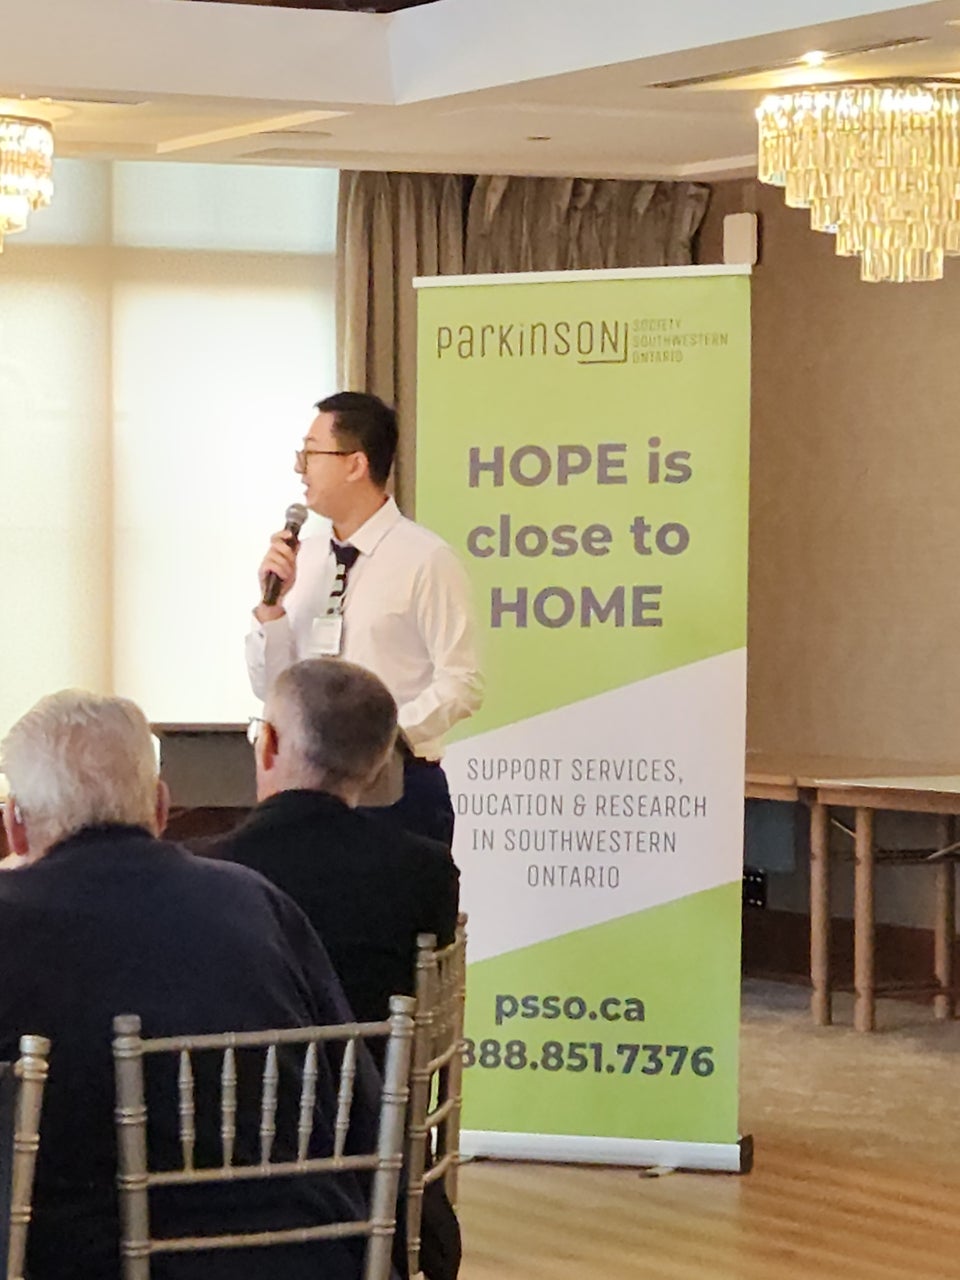 Yusheng Zhao presenting his research during the PSSO Ontario event.